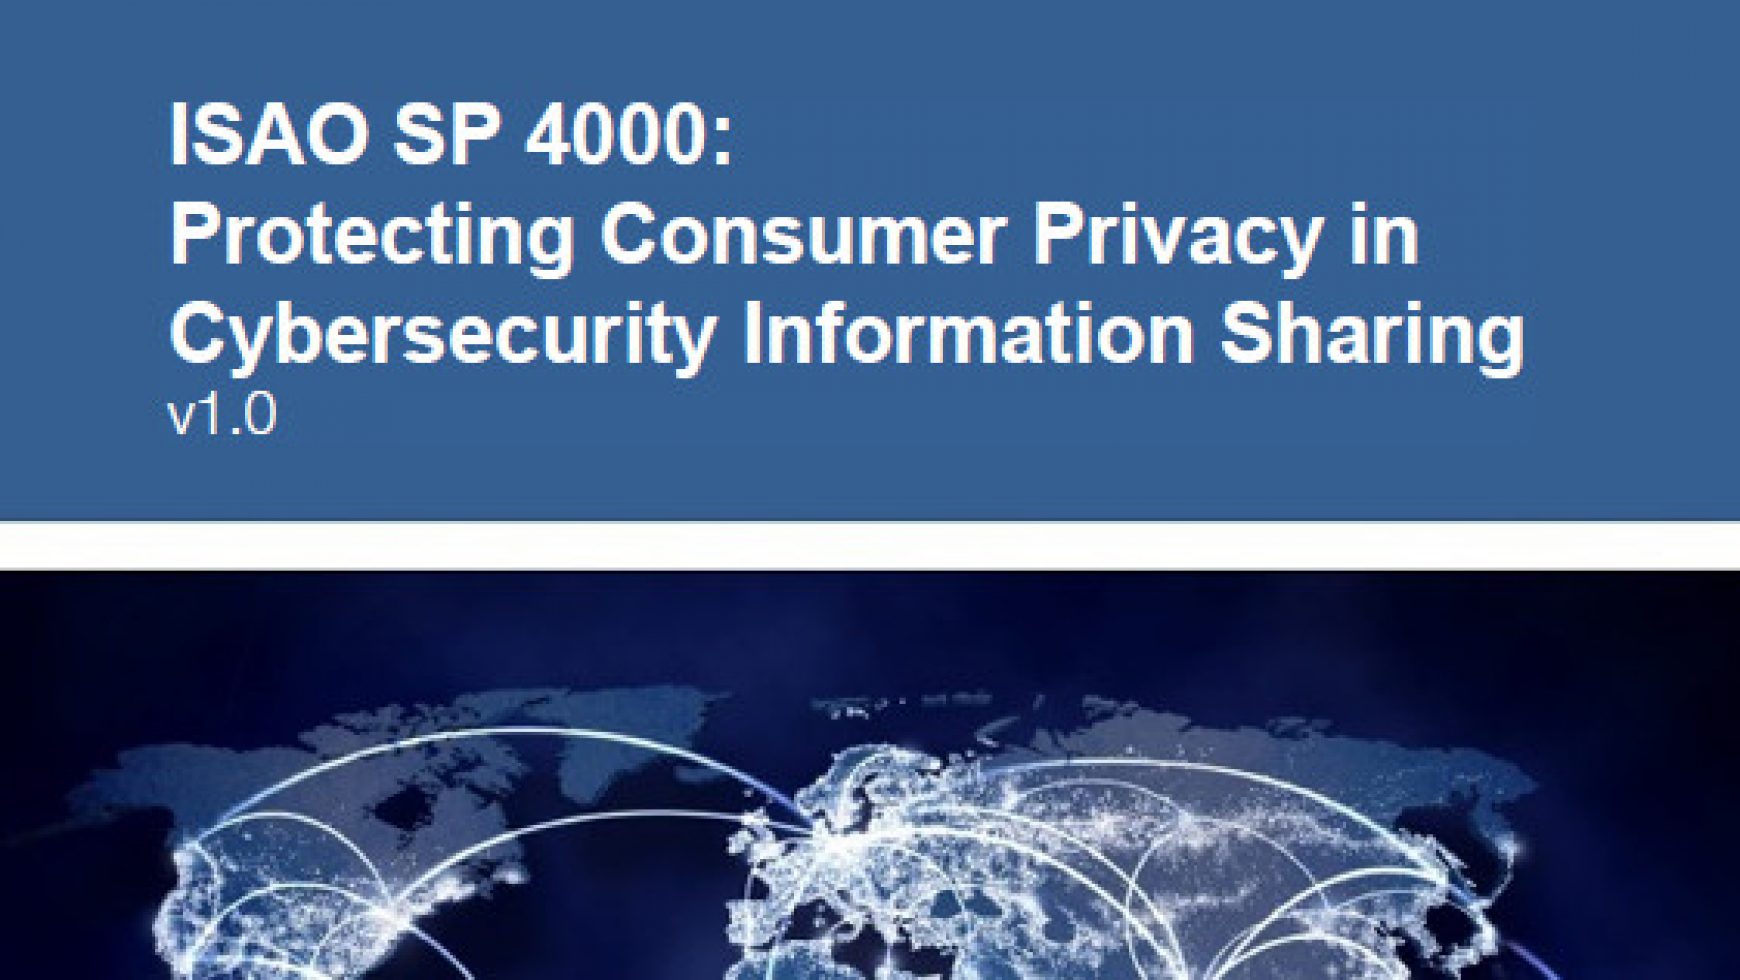 ISAO SP 4000: Protecting Consumer Privacy in Cybersecurity Information Sharing v1.0